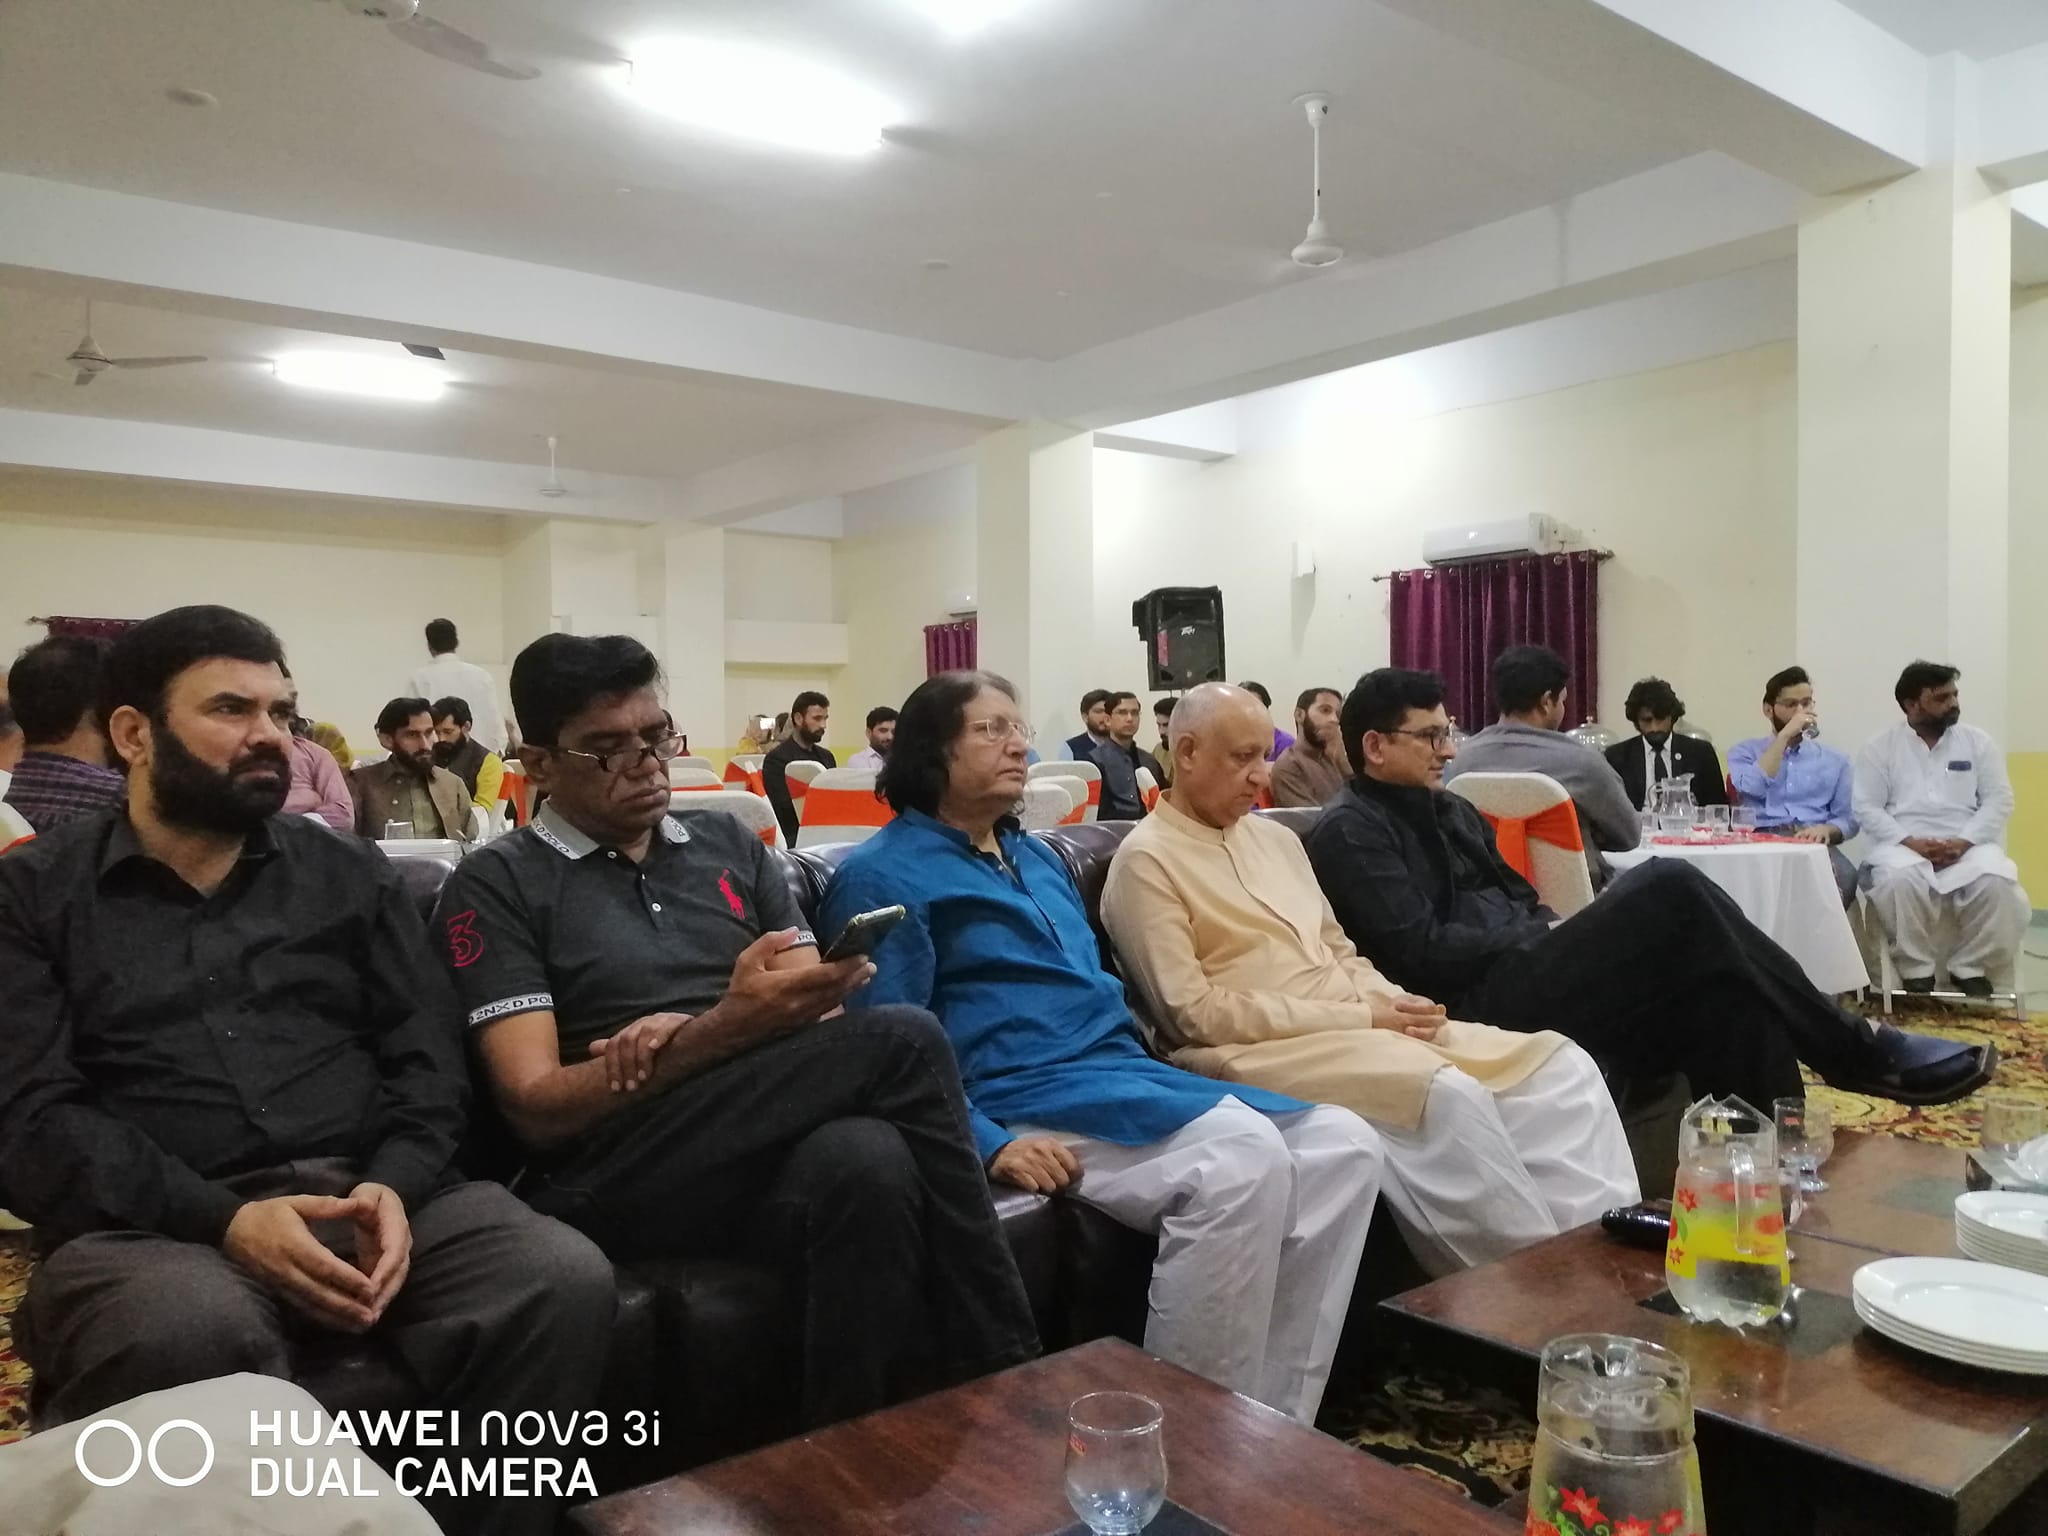 Superior Group of Colleges Hosts a Lavish Dinner and Poetry Session for Wajid Amir